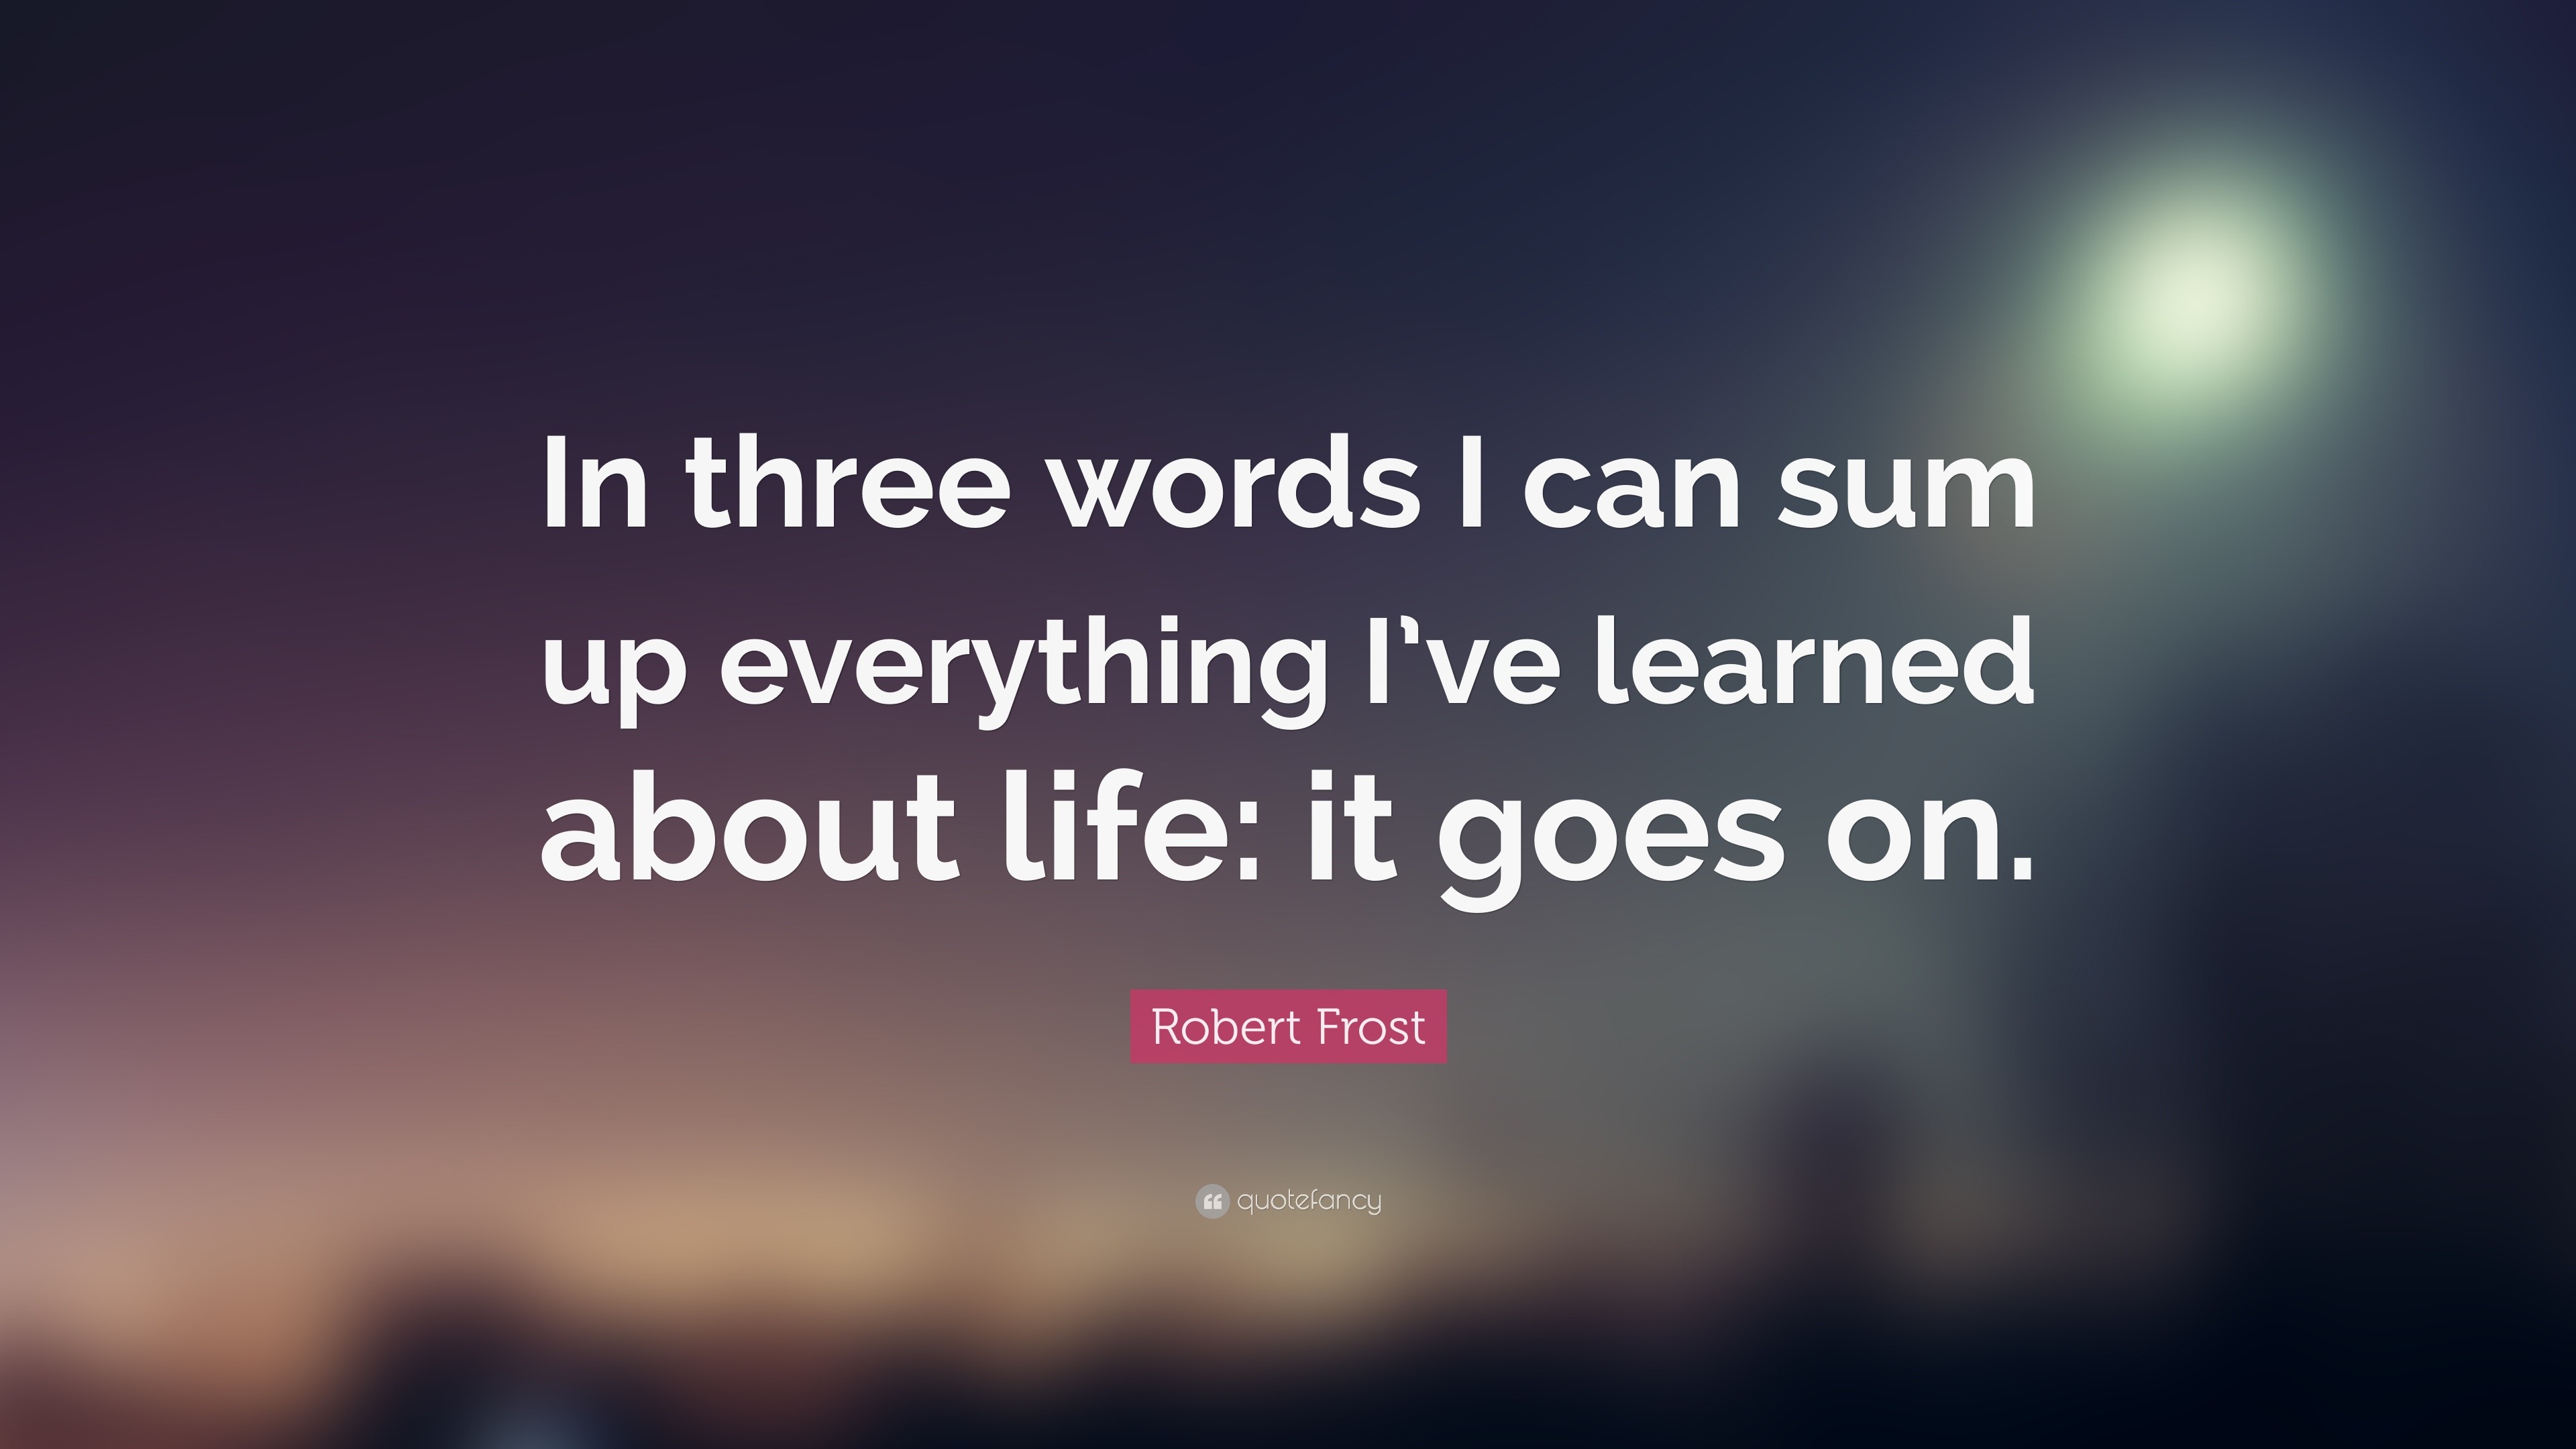 Robert Frost Quote “In three words I can sum up everything I ve